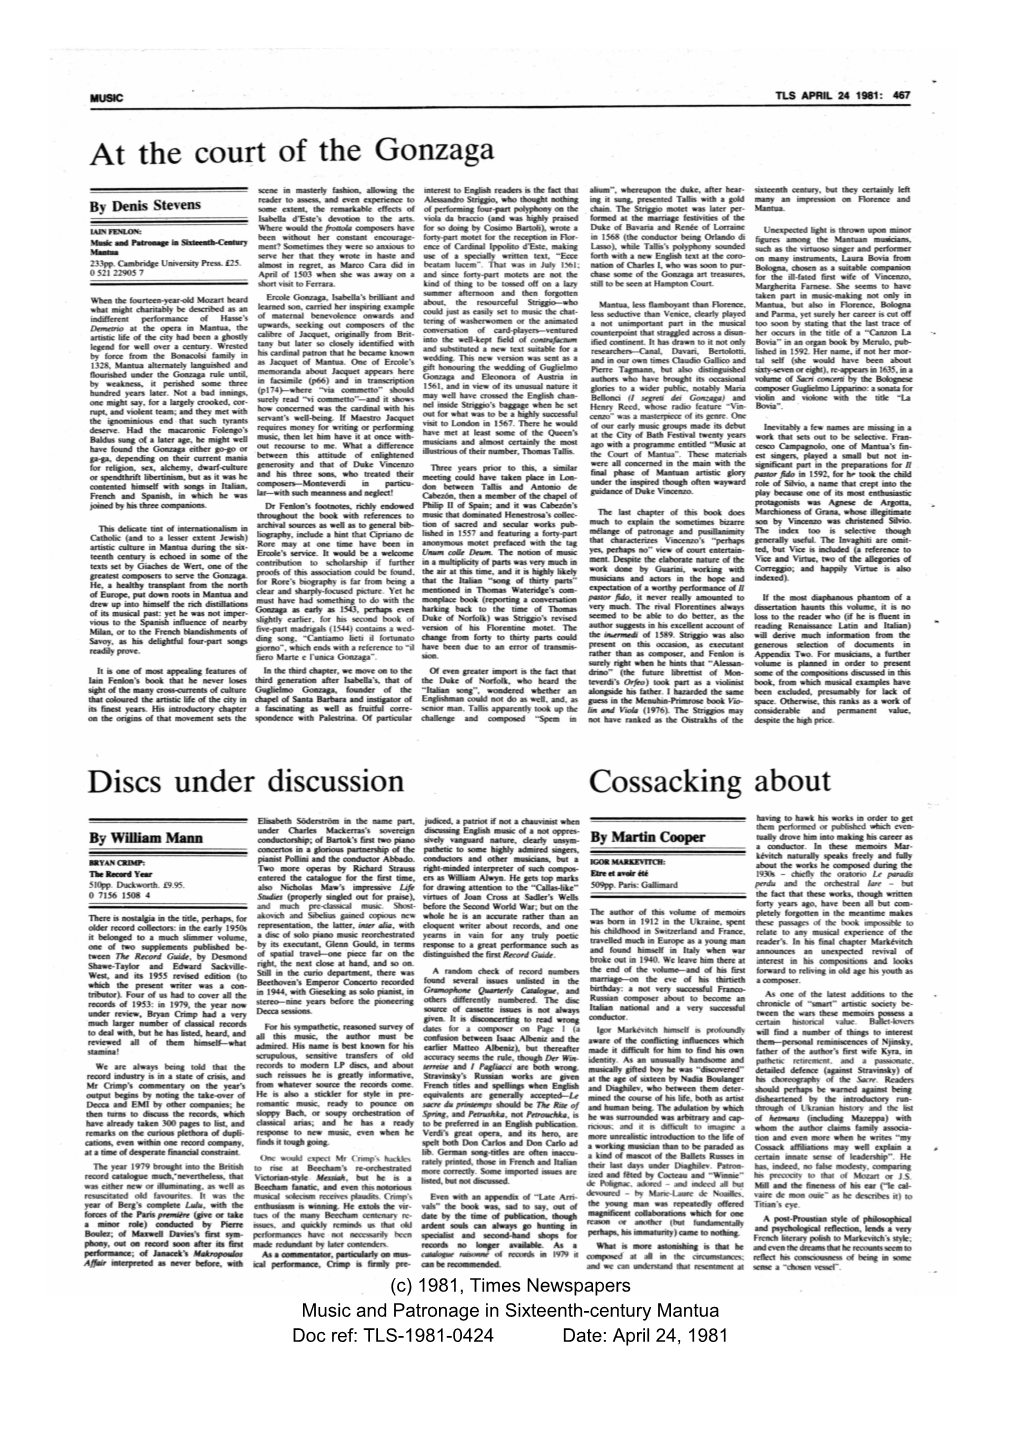 Times Literary Supplement, April 24, 1981